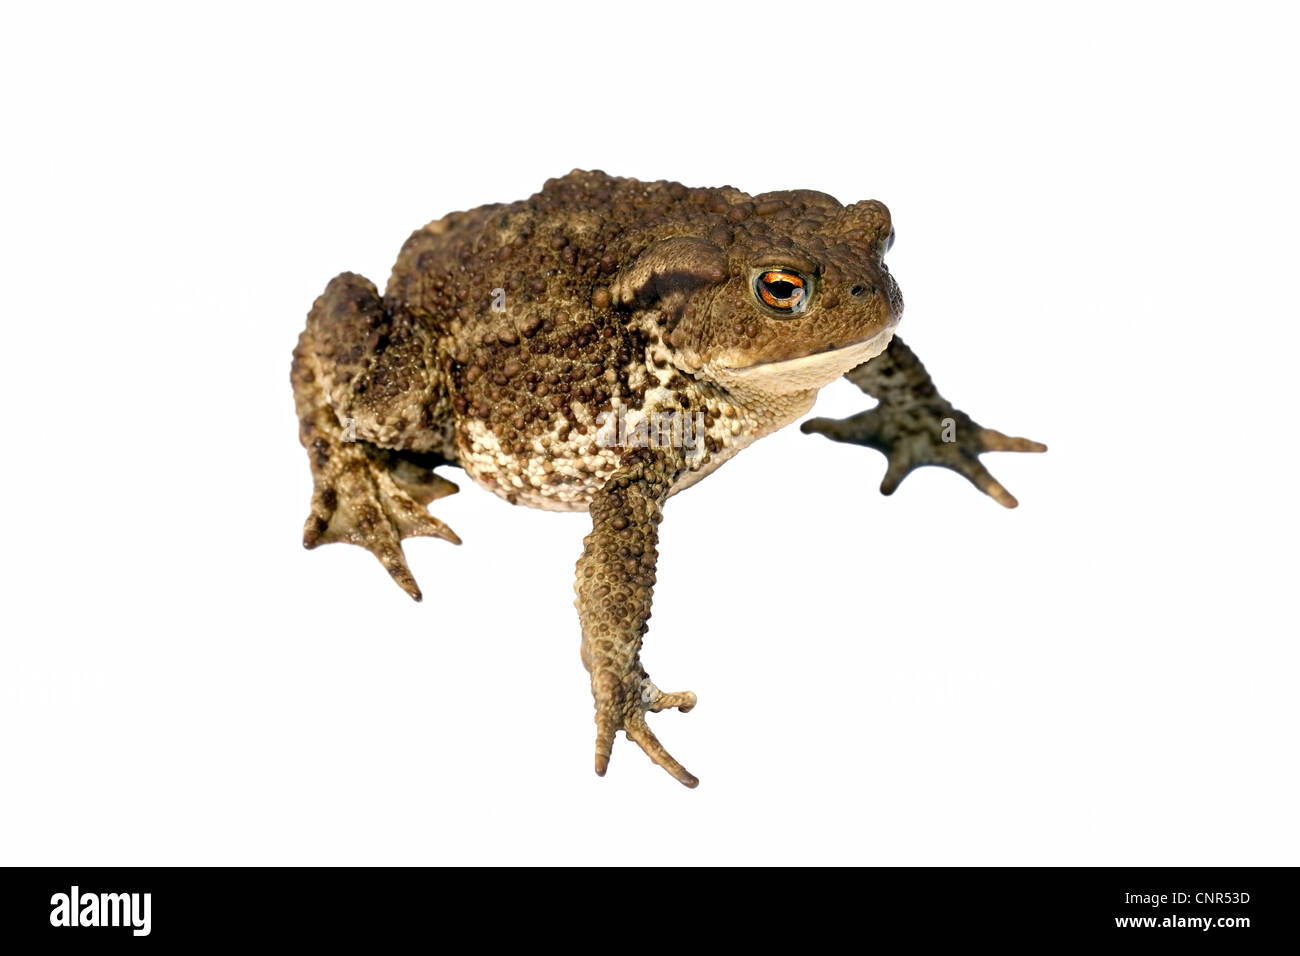 Crapaud commun Bufo bufo Banque D'Images